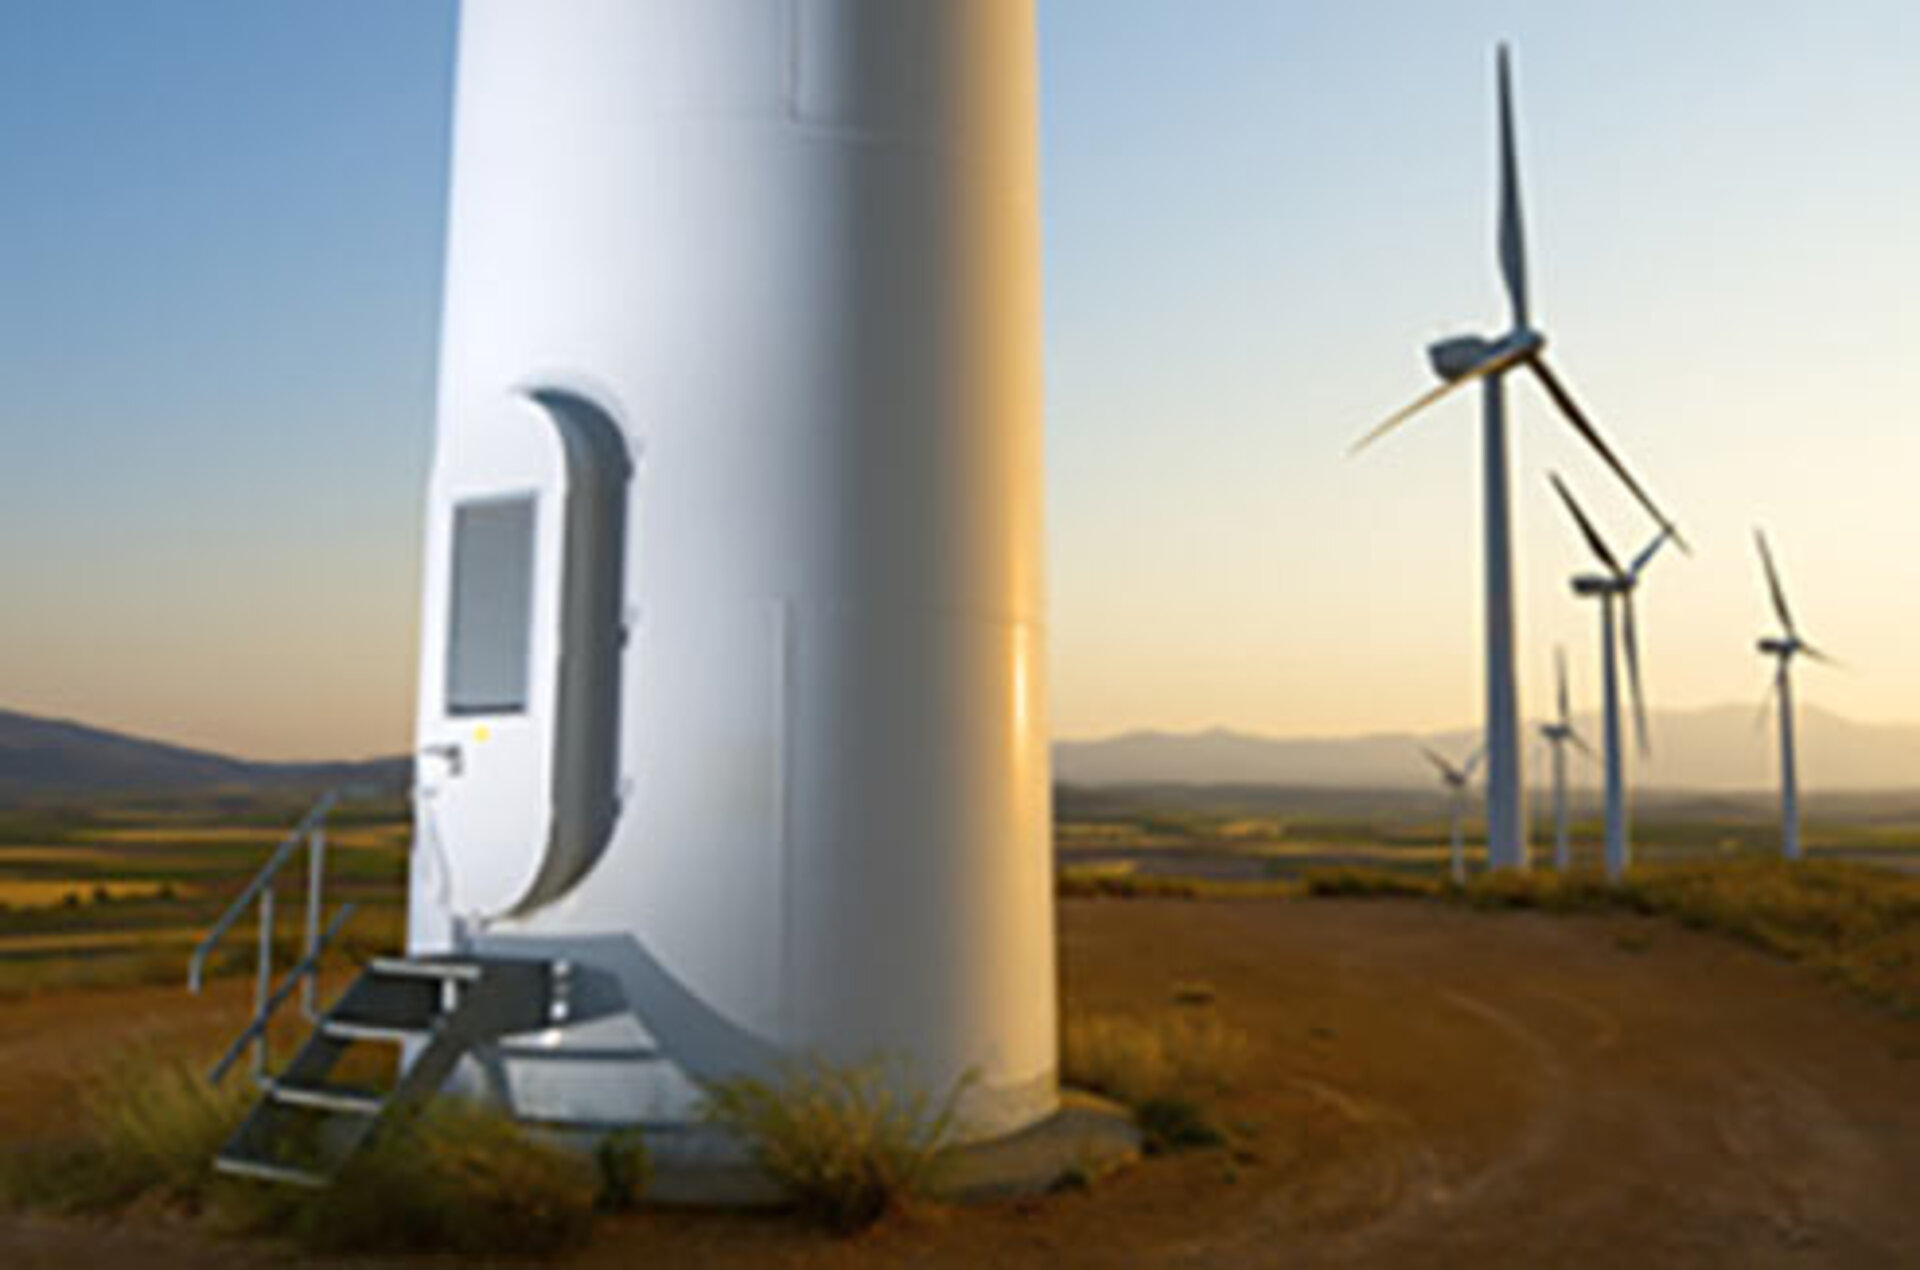 Ground fault protection for general low voltage control systems in wind turbines